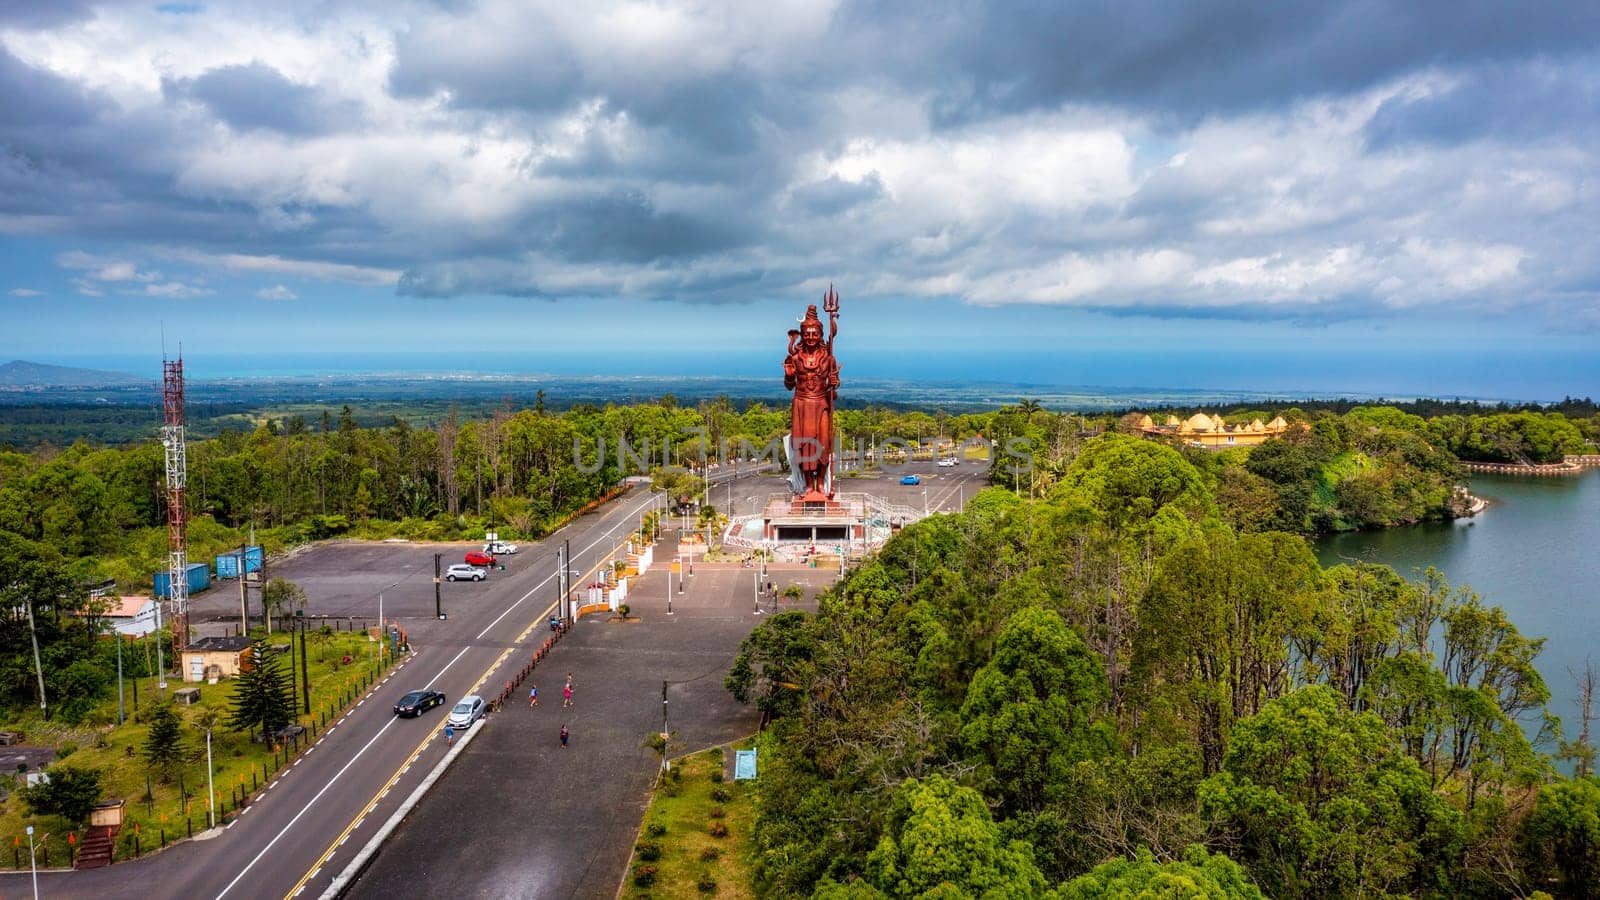 Shiva statue at Grand Bassin temple, the world's tallest Shiva temple, it is 33 meters tall. Important hindu temples of Mauritius. A large statue of the Hindu god Shiva, seen from above, Mauritius. by DaLiu